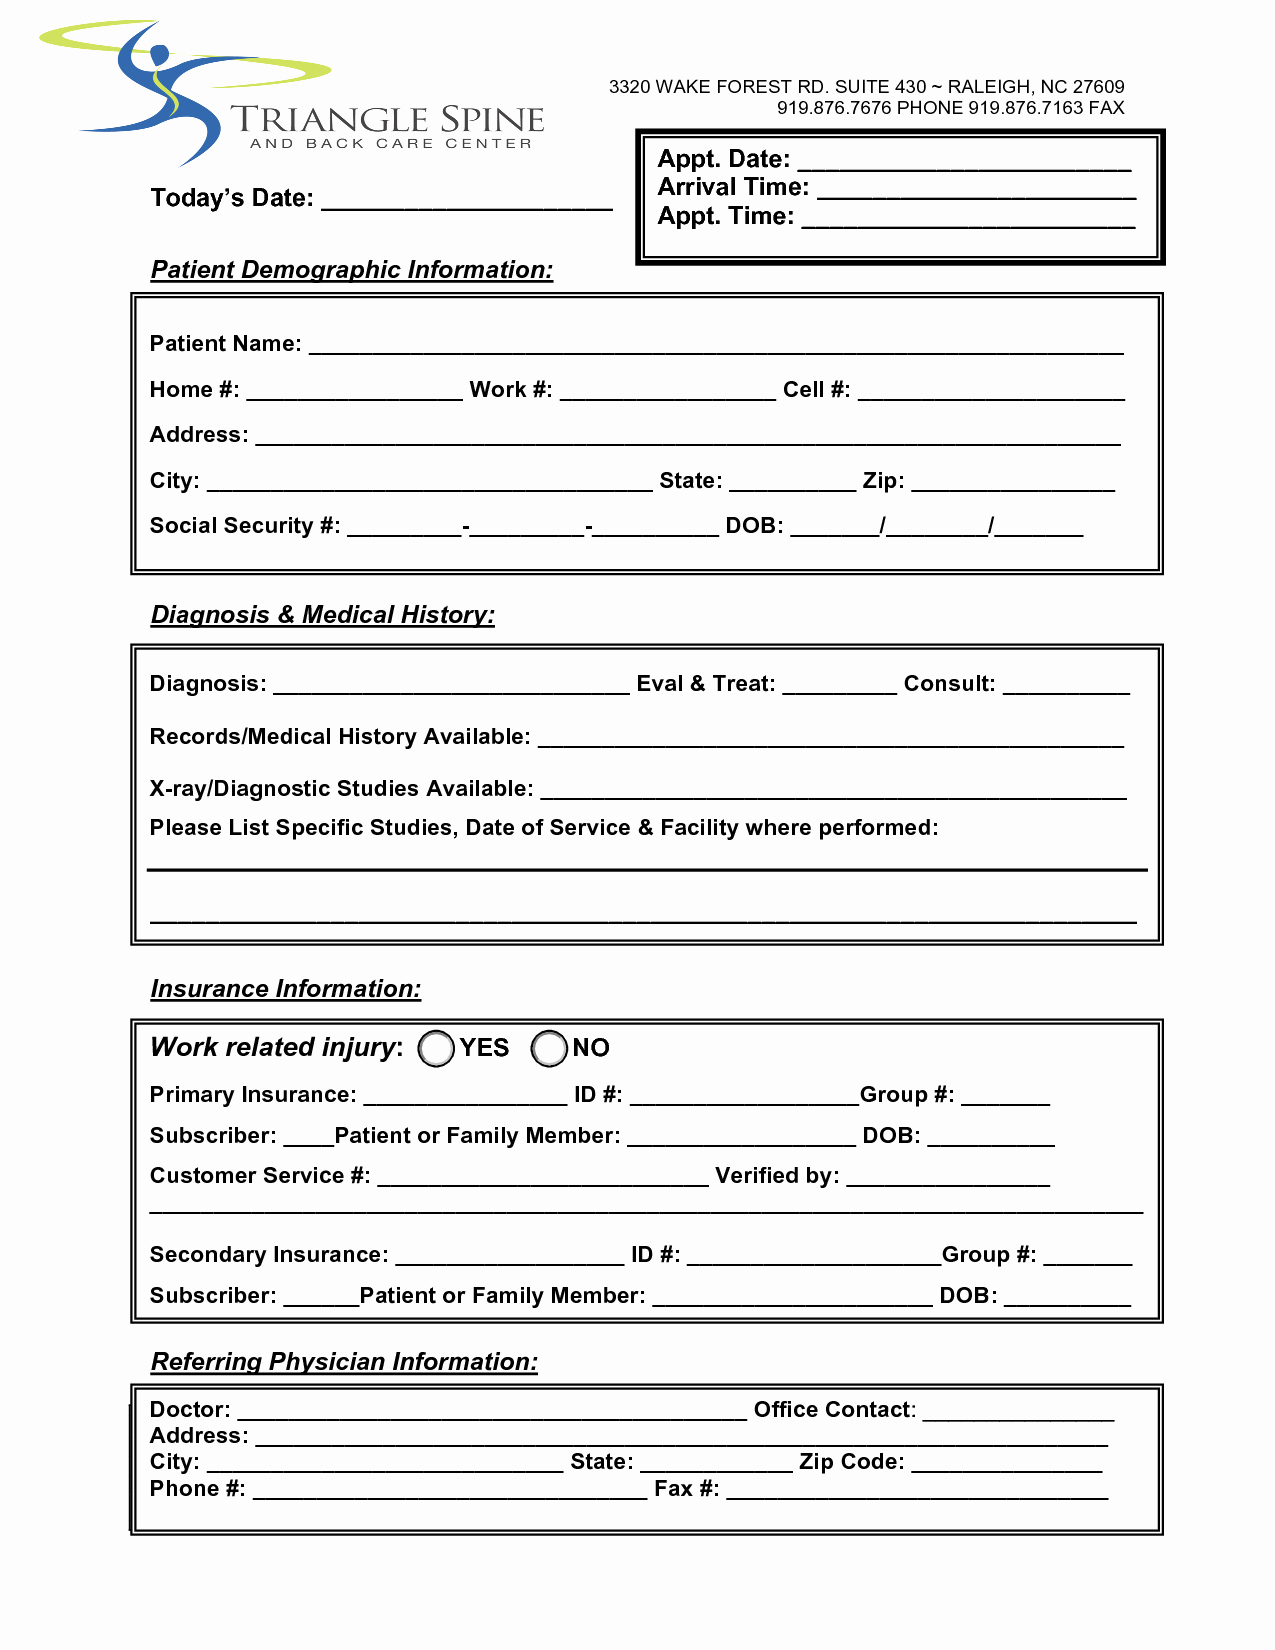 Doctor Referral form Template Best Of Medical Referral form Templates – Medical form Templates